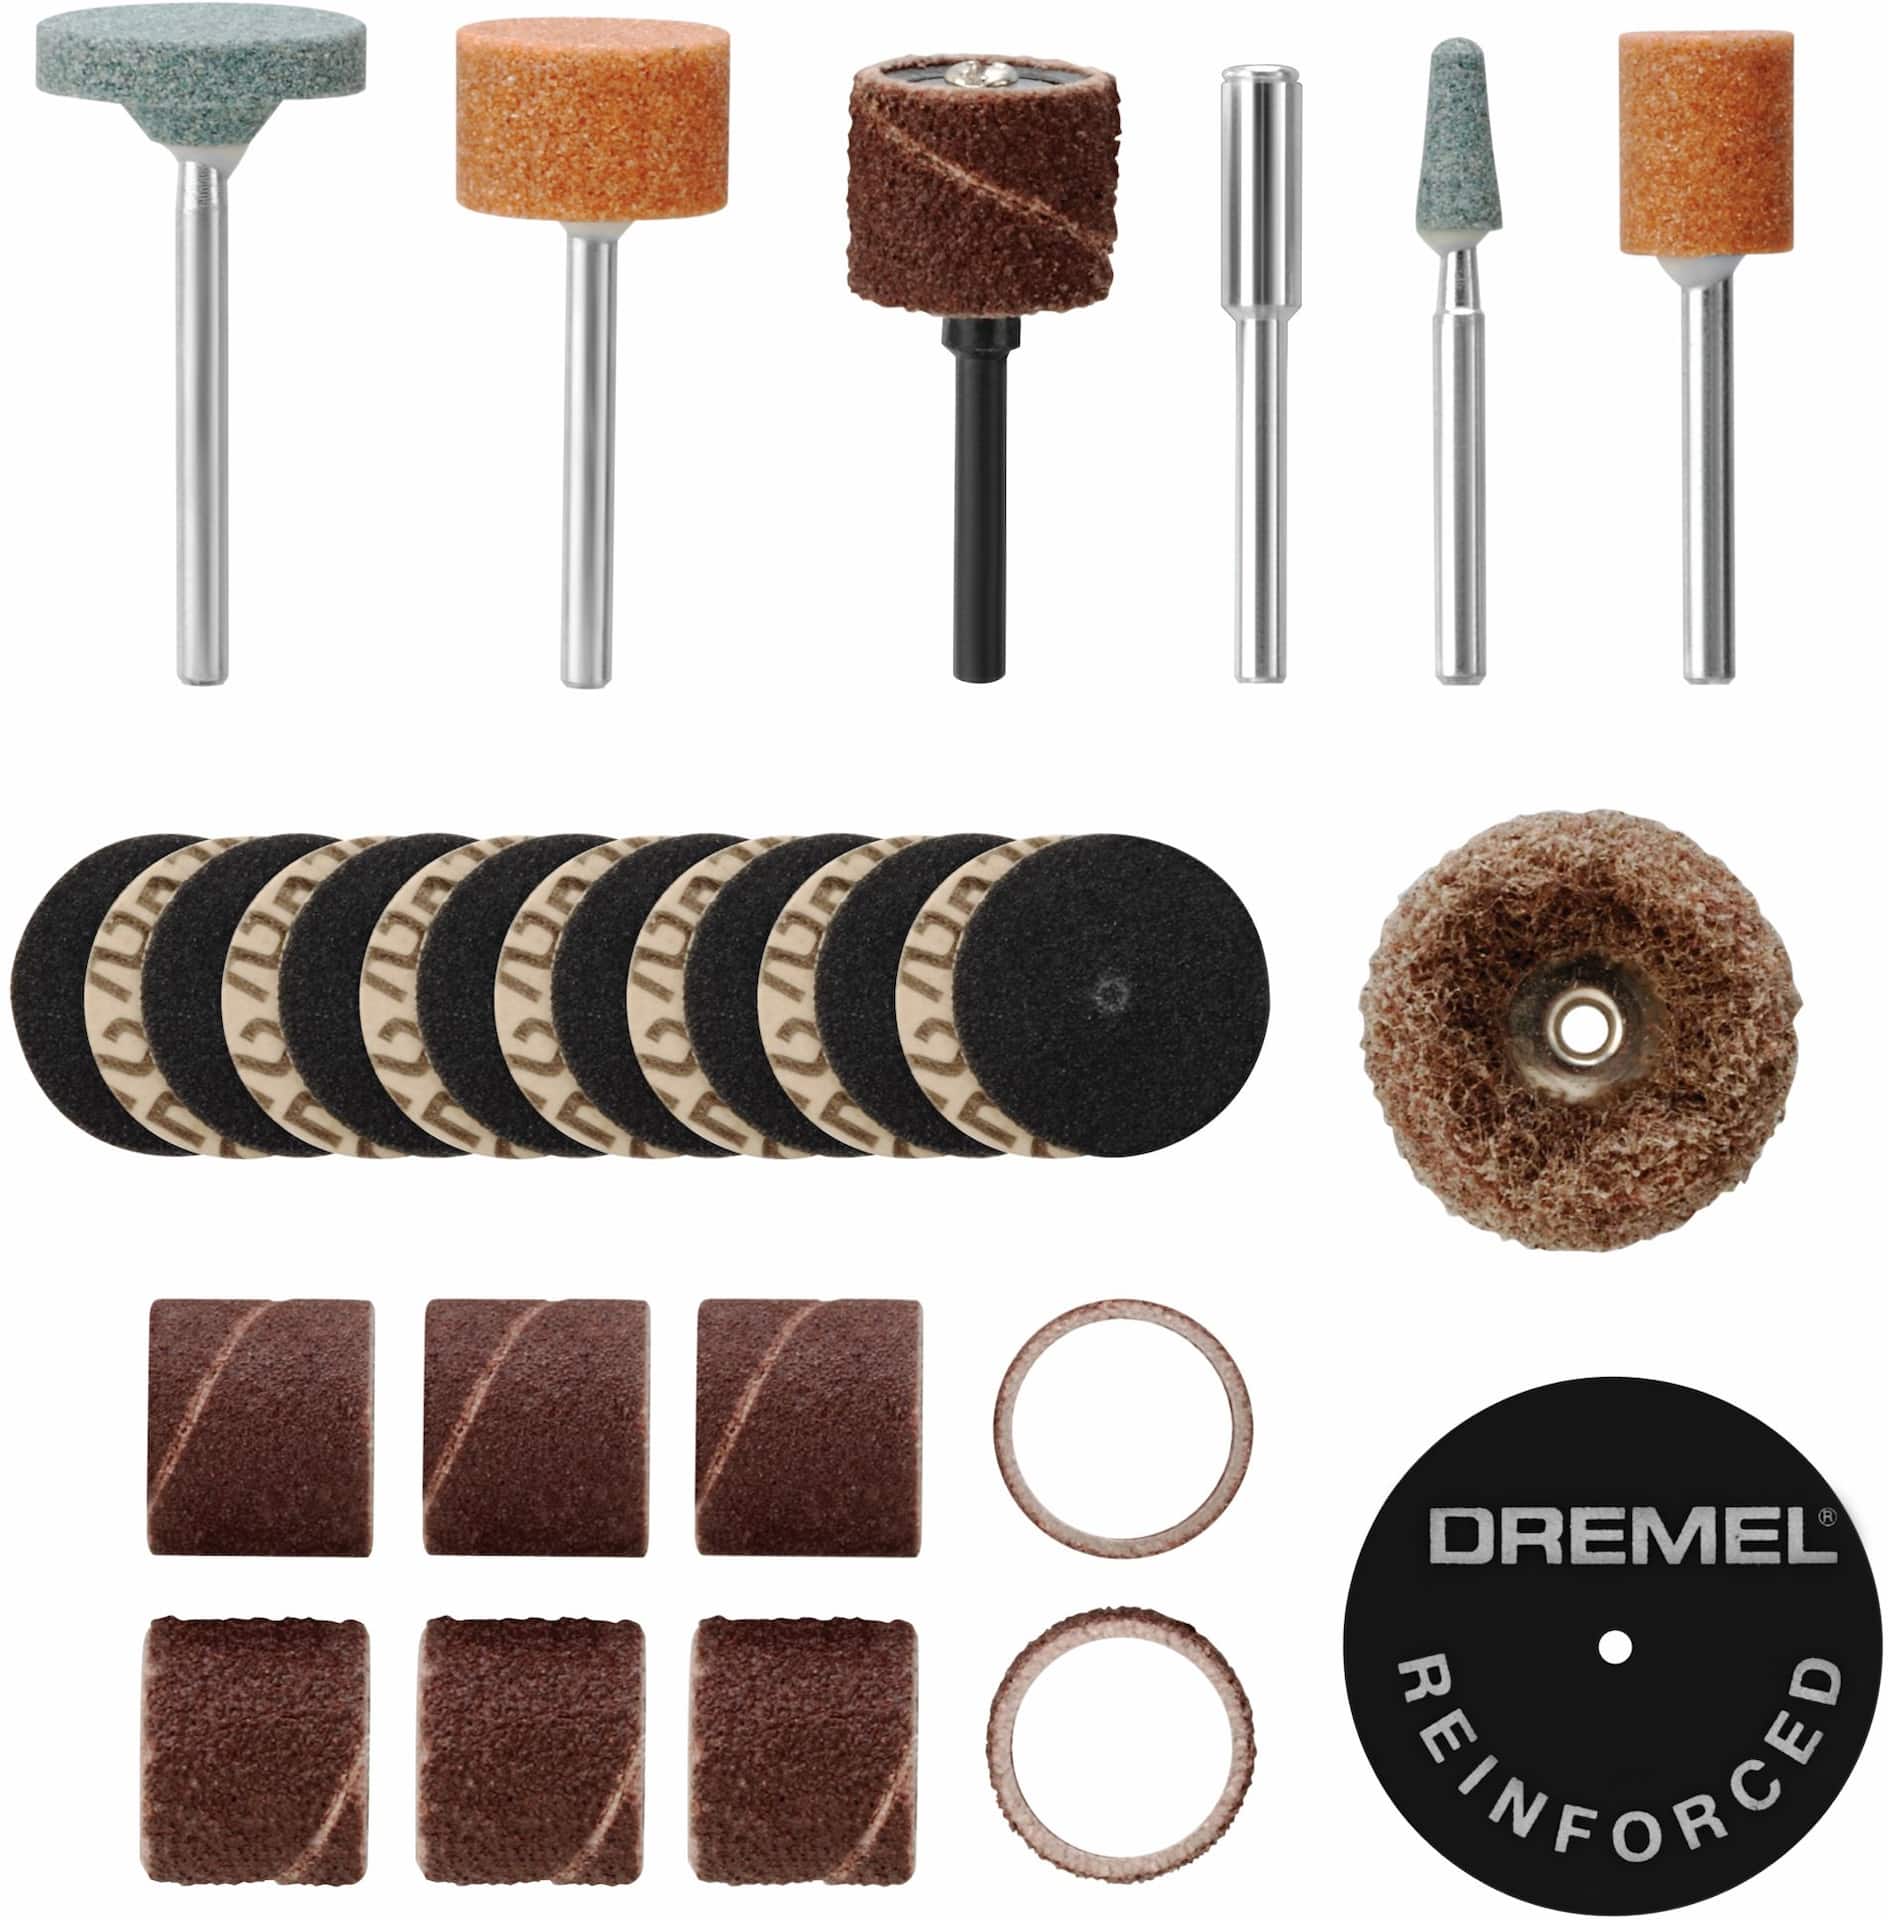 Dremel 686-01 31 Piece Sanding and Grinding Rotary Tool Accessory Kit-  Includes Sanding Drums, Grinding Stones, Abrasive Buff, Cutting Discs, and  a